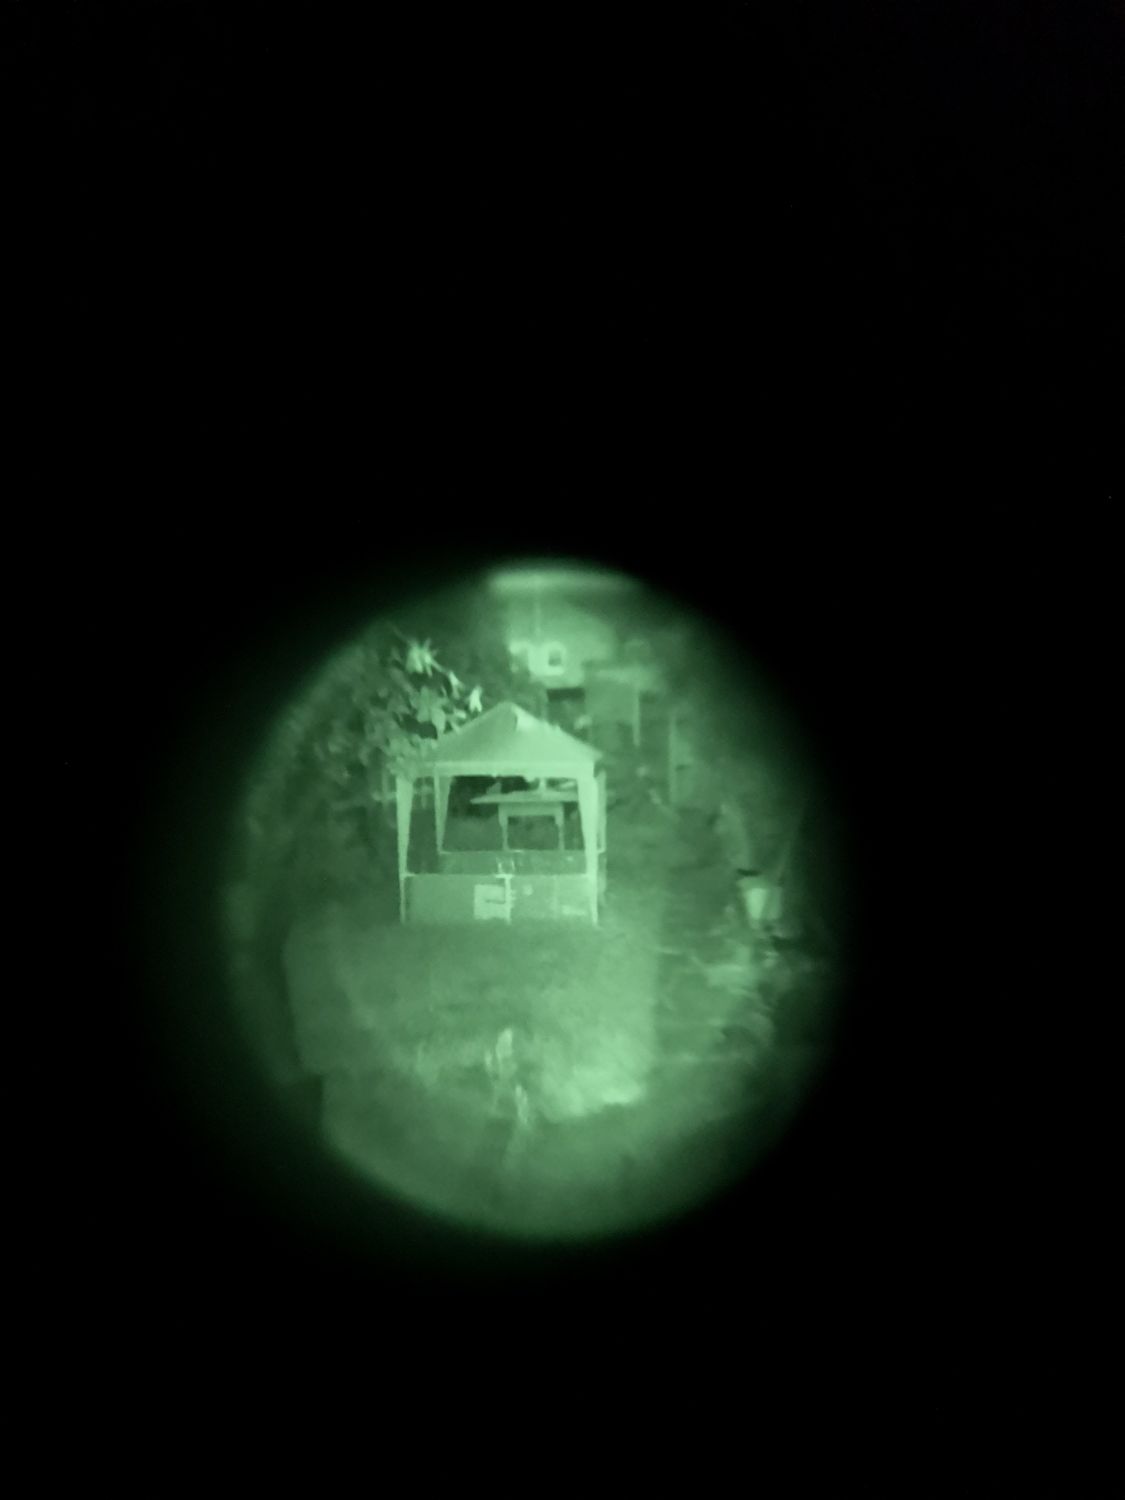 Pulsar gen 1+ nvg, fma team Wendy, acetech tracer - Parts - Airsoft ...